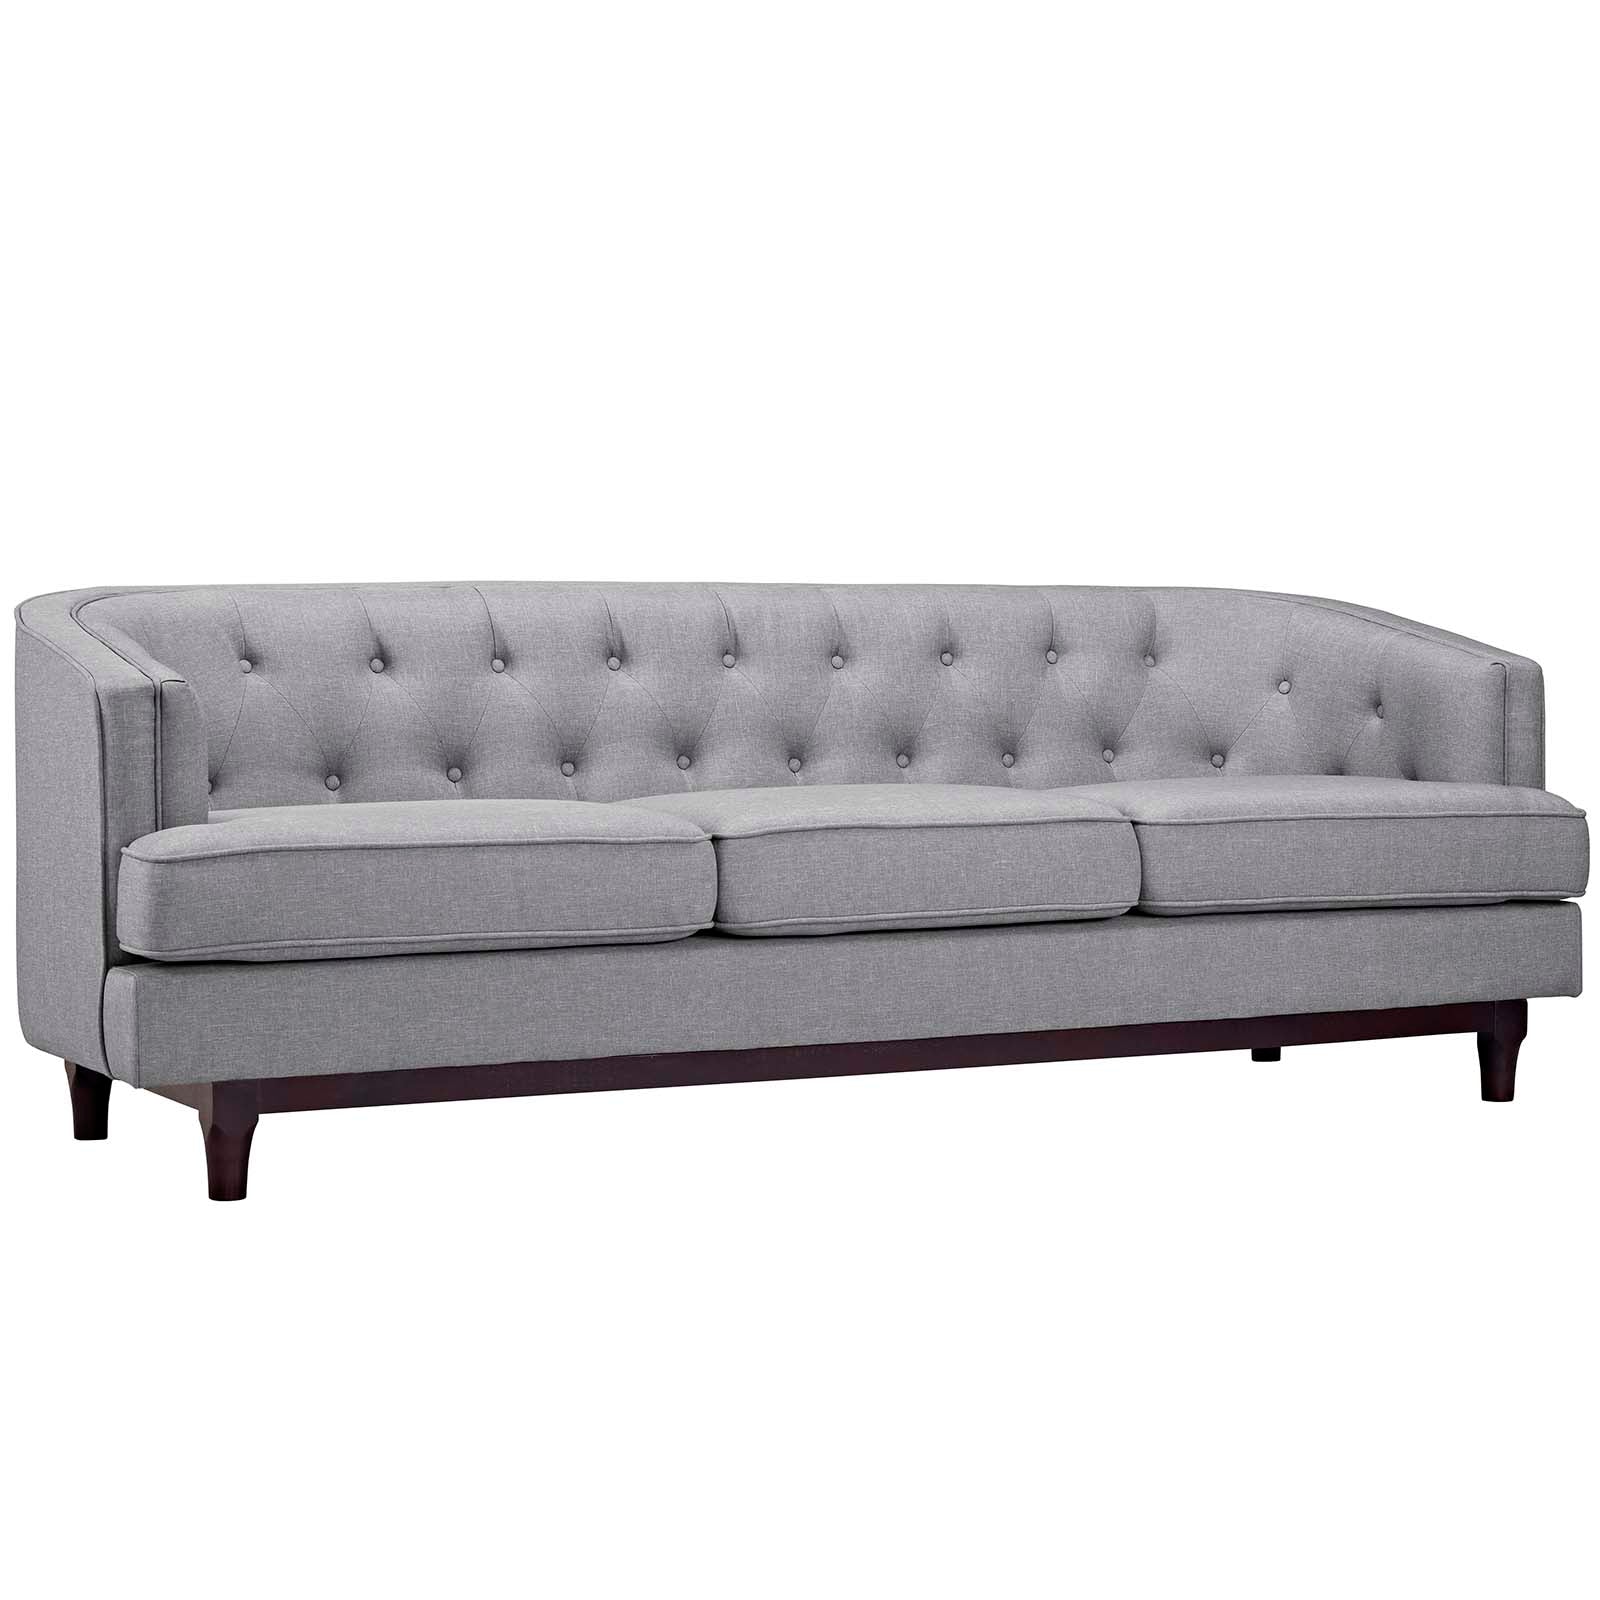 Modway Sofas & Couches - Coast Upholstered Fabric Sofa Light Gray